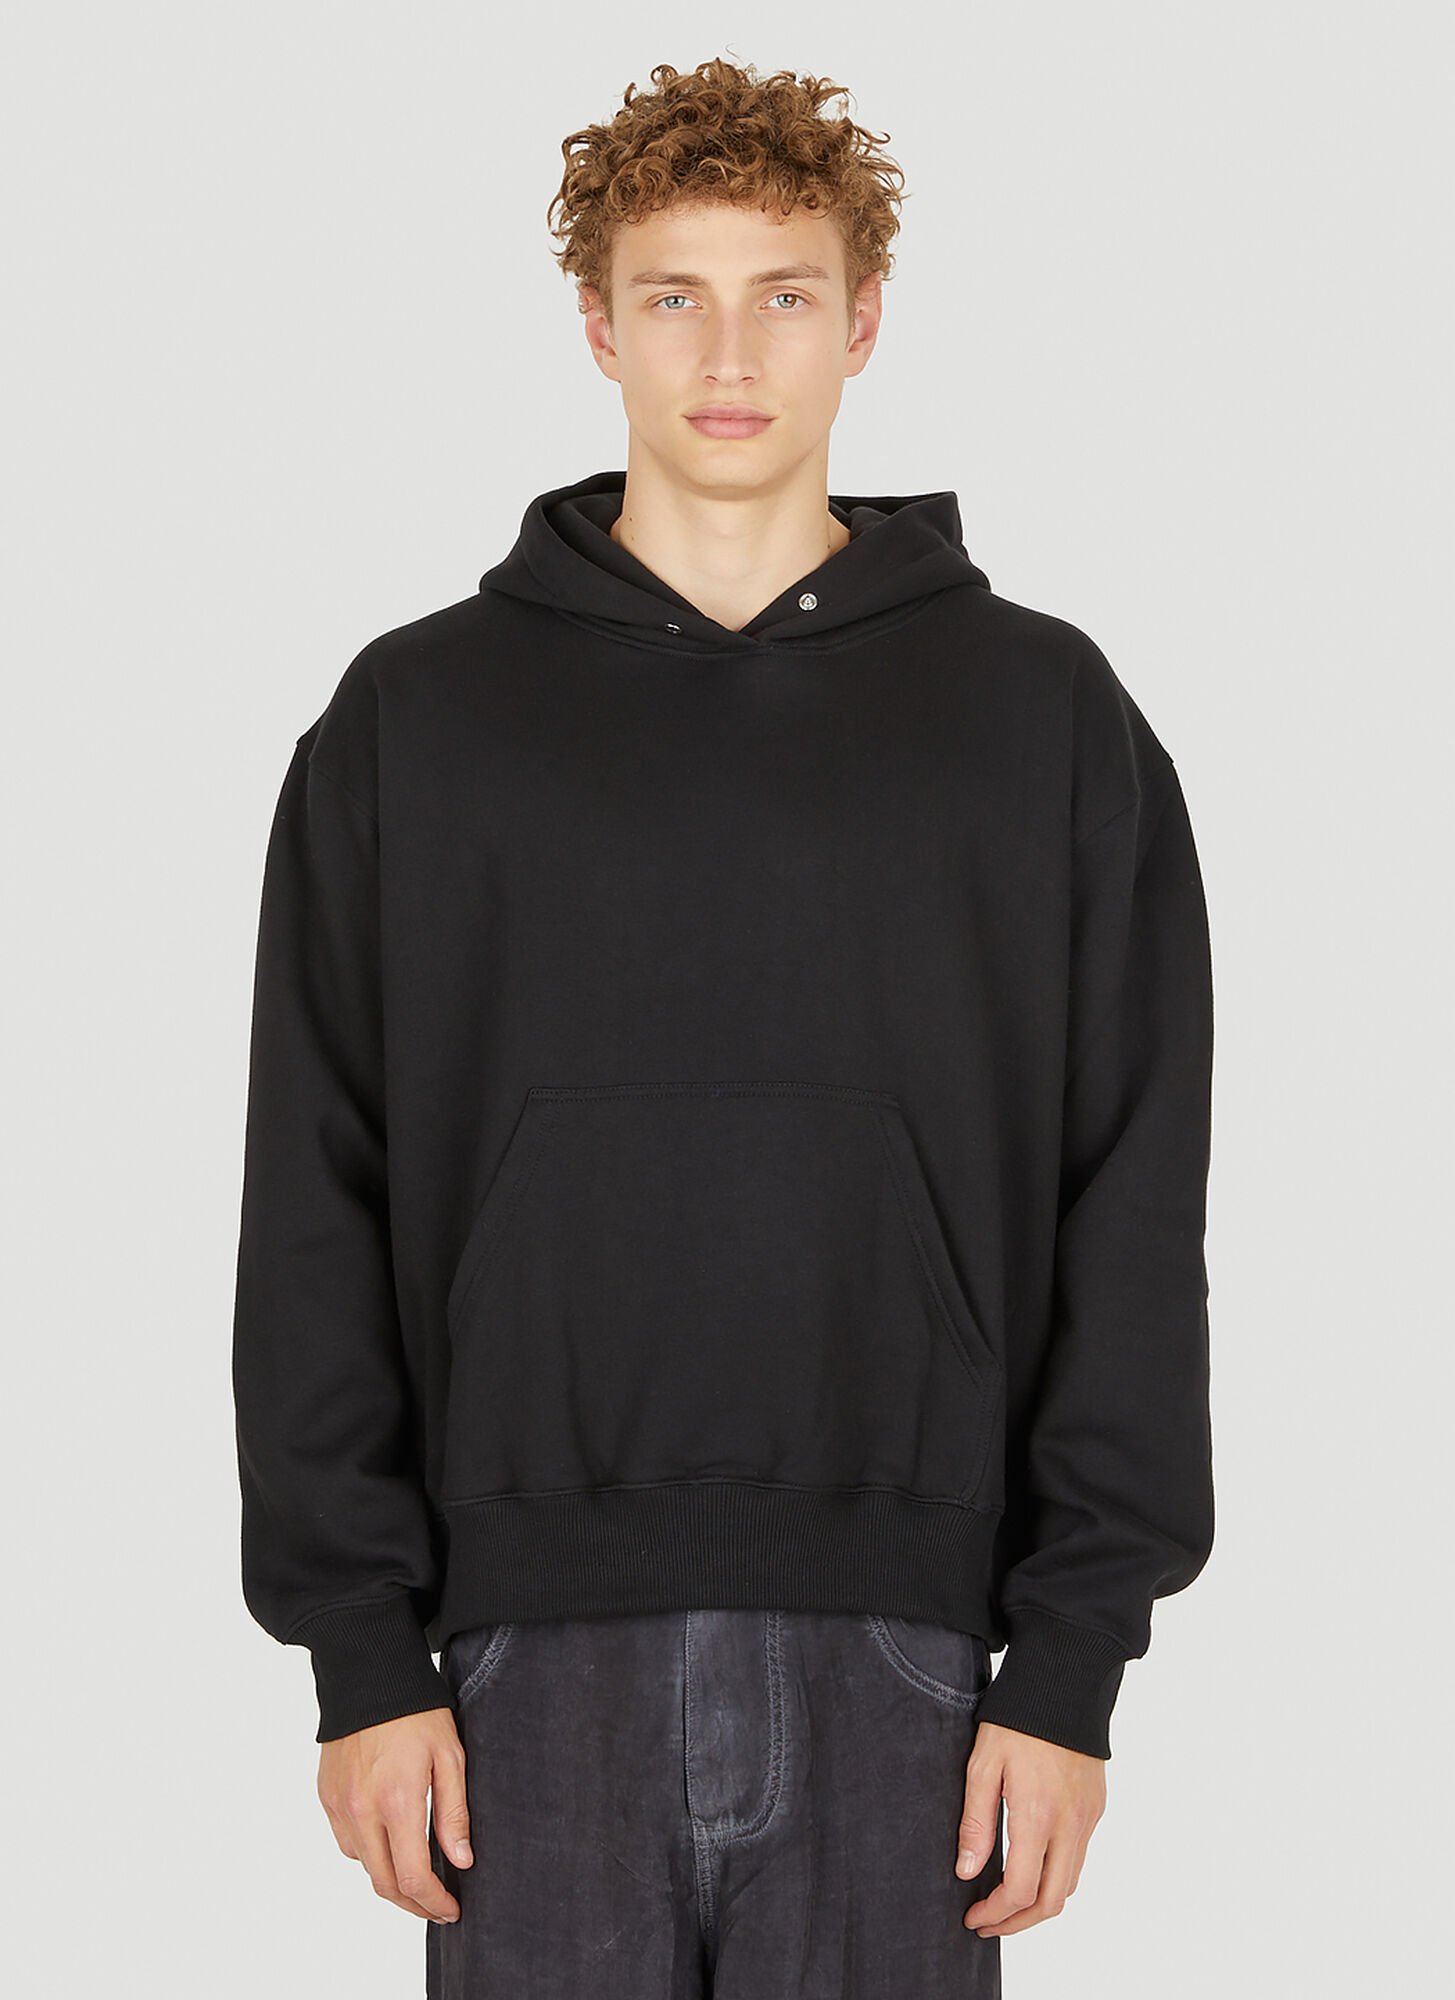 The Salvages Form & Function Hooded Sweatshirt In Black